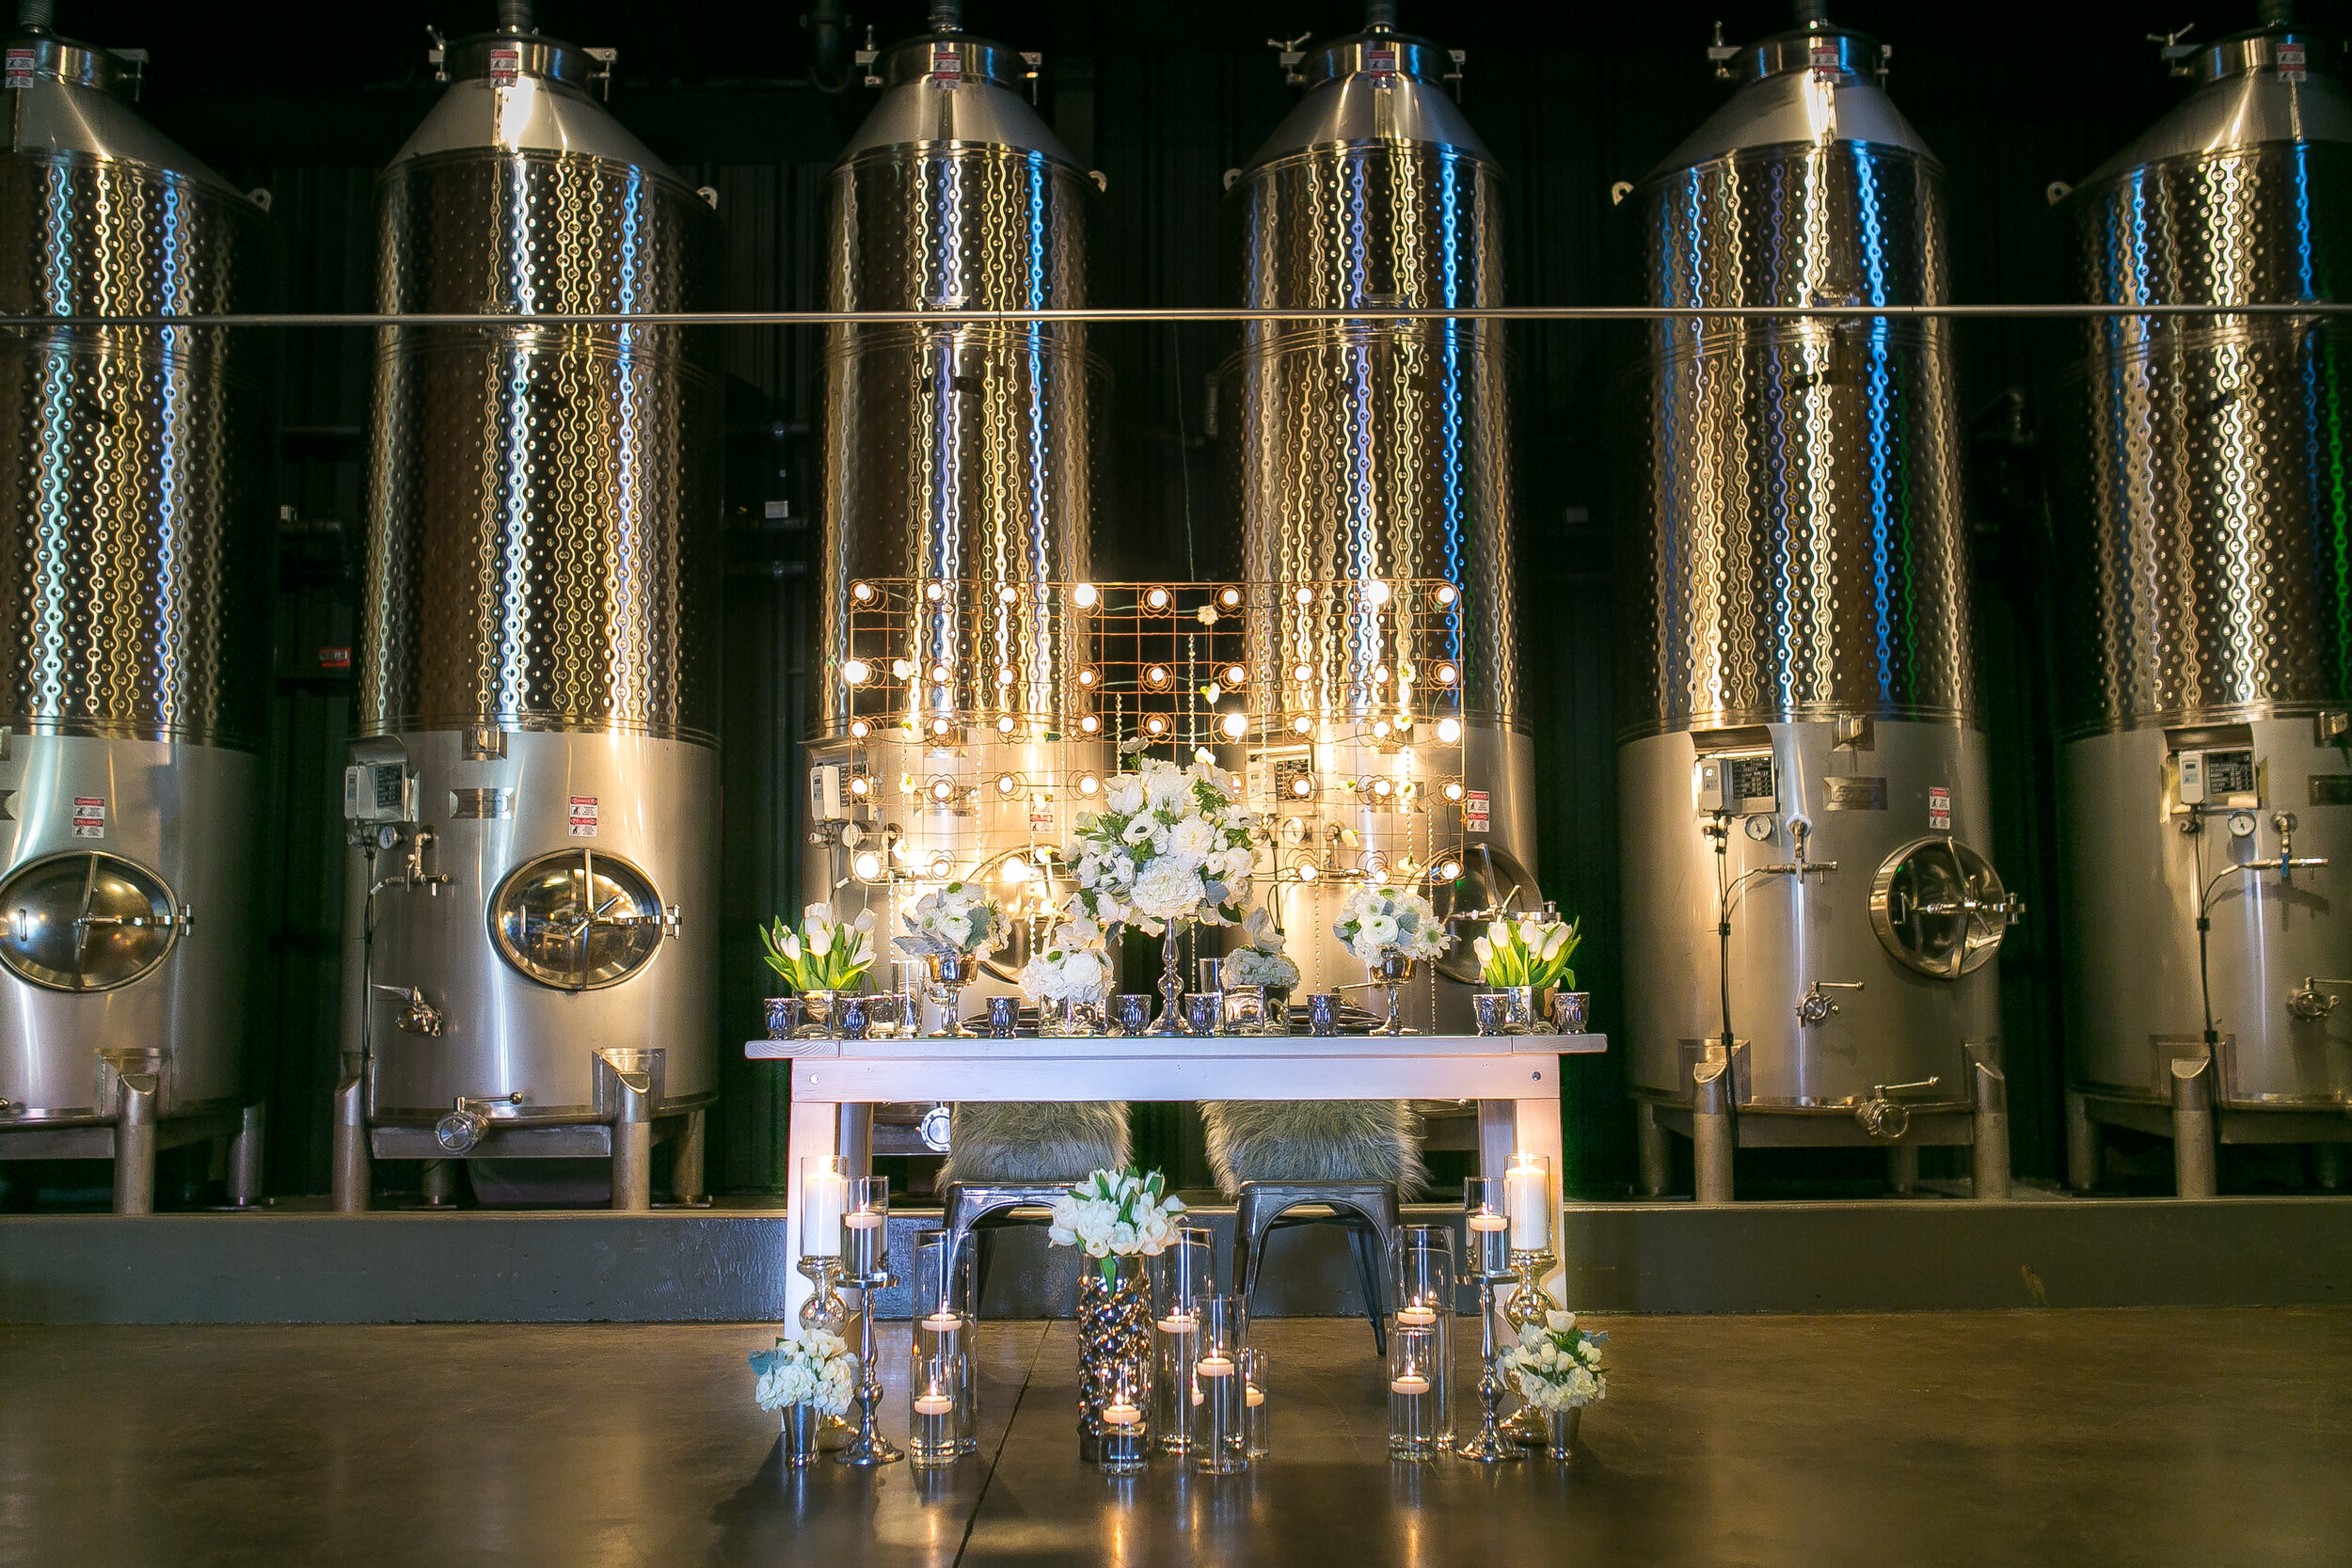 Head table set up in front of metal wine tanks